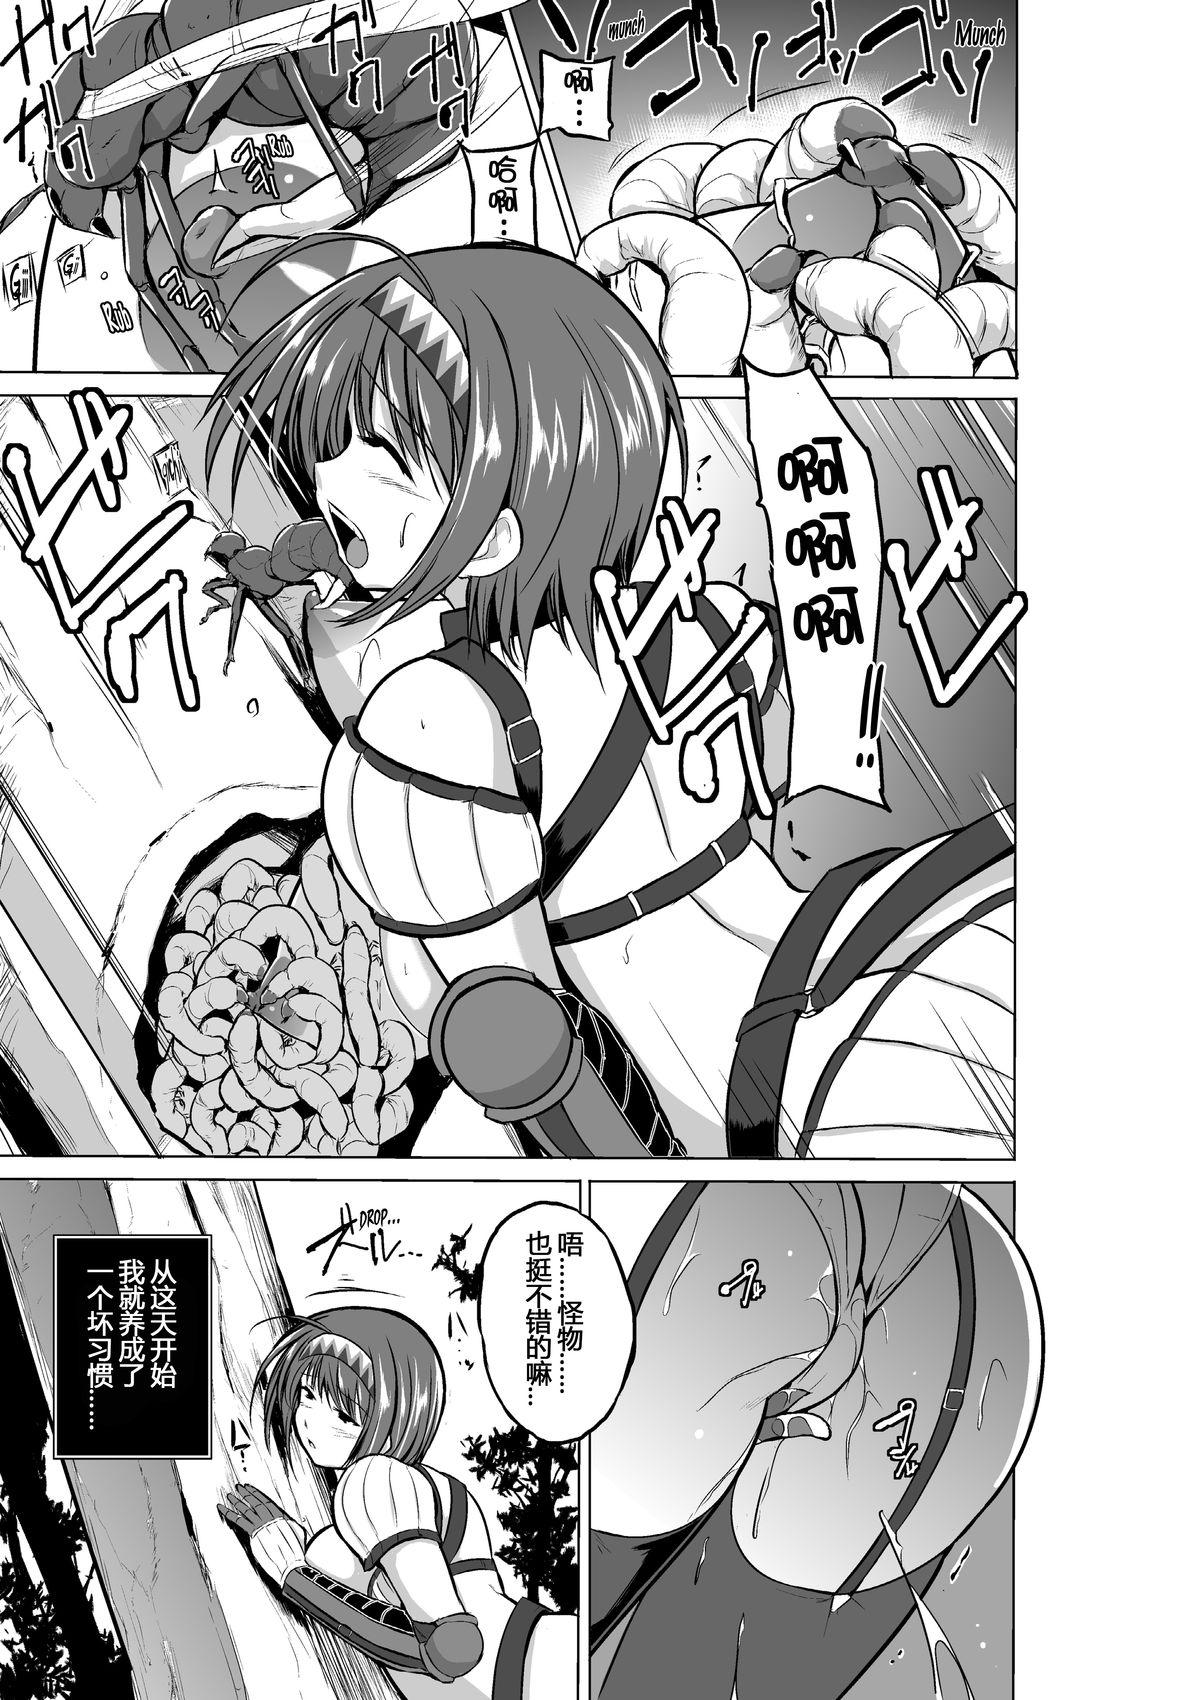 Crossdresser Dungeon Travelers - Chie no Himegoto - Toheart2 Homosexual - Page 9